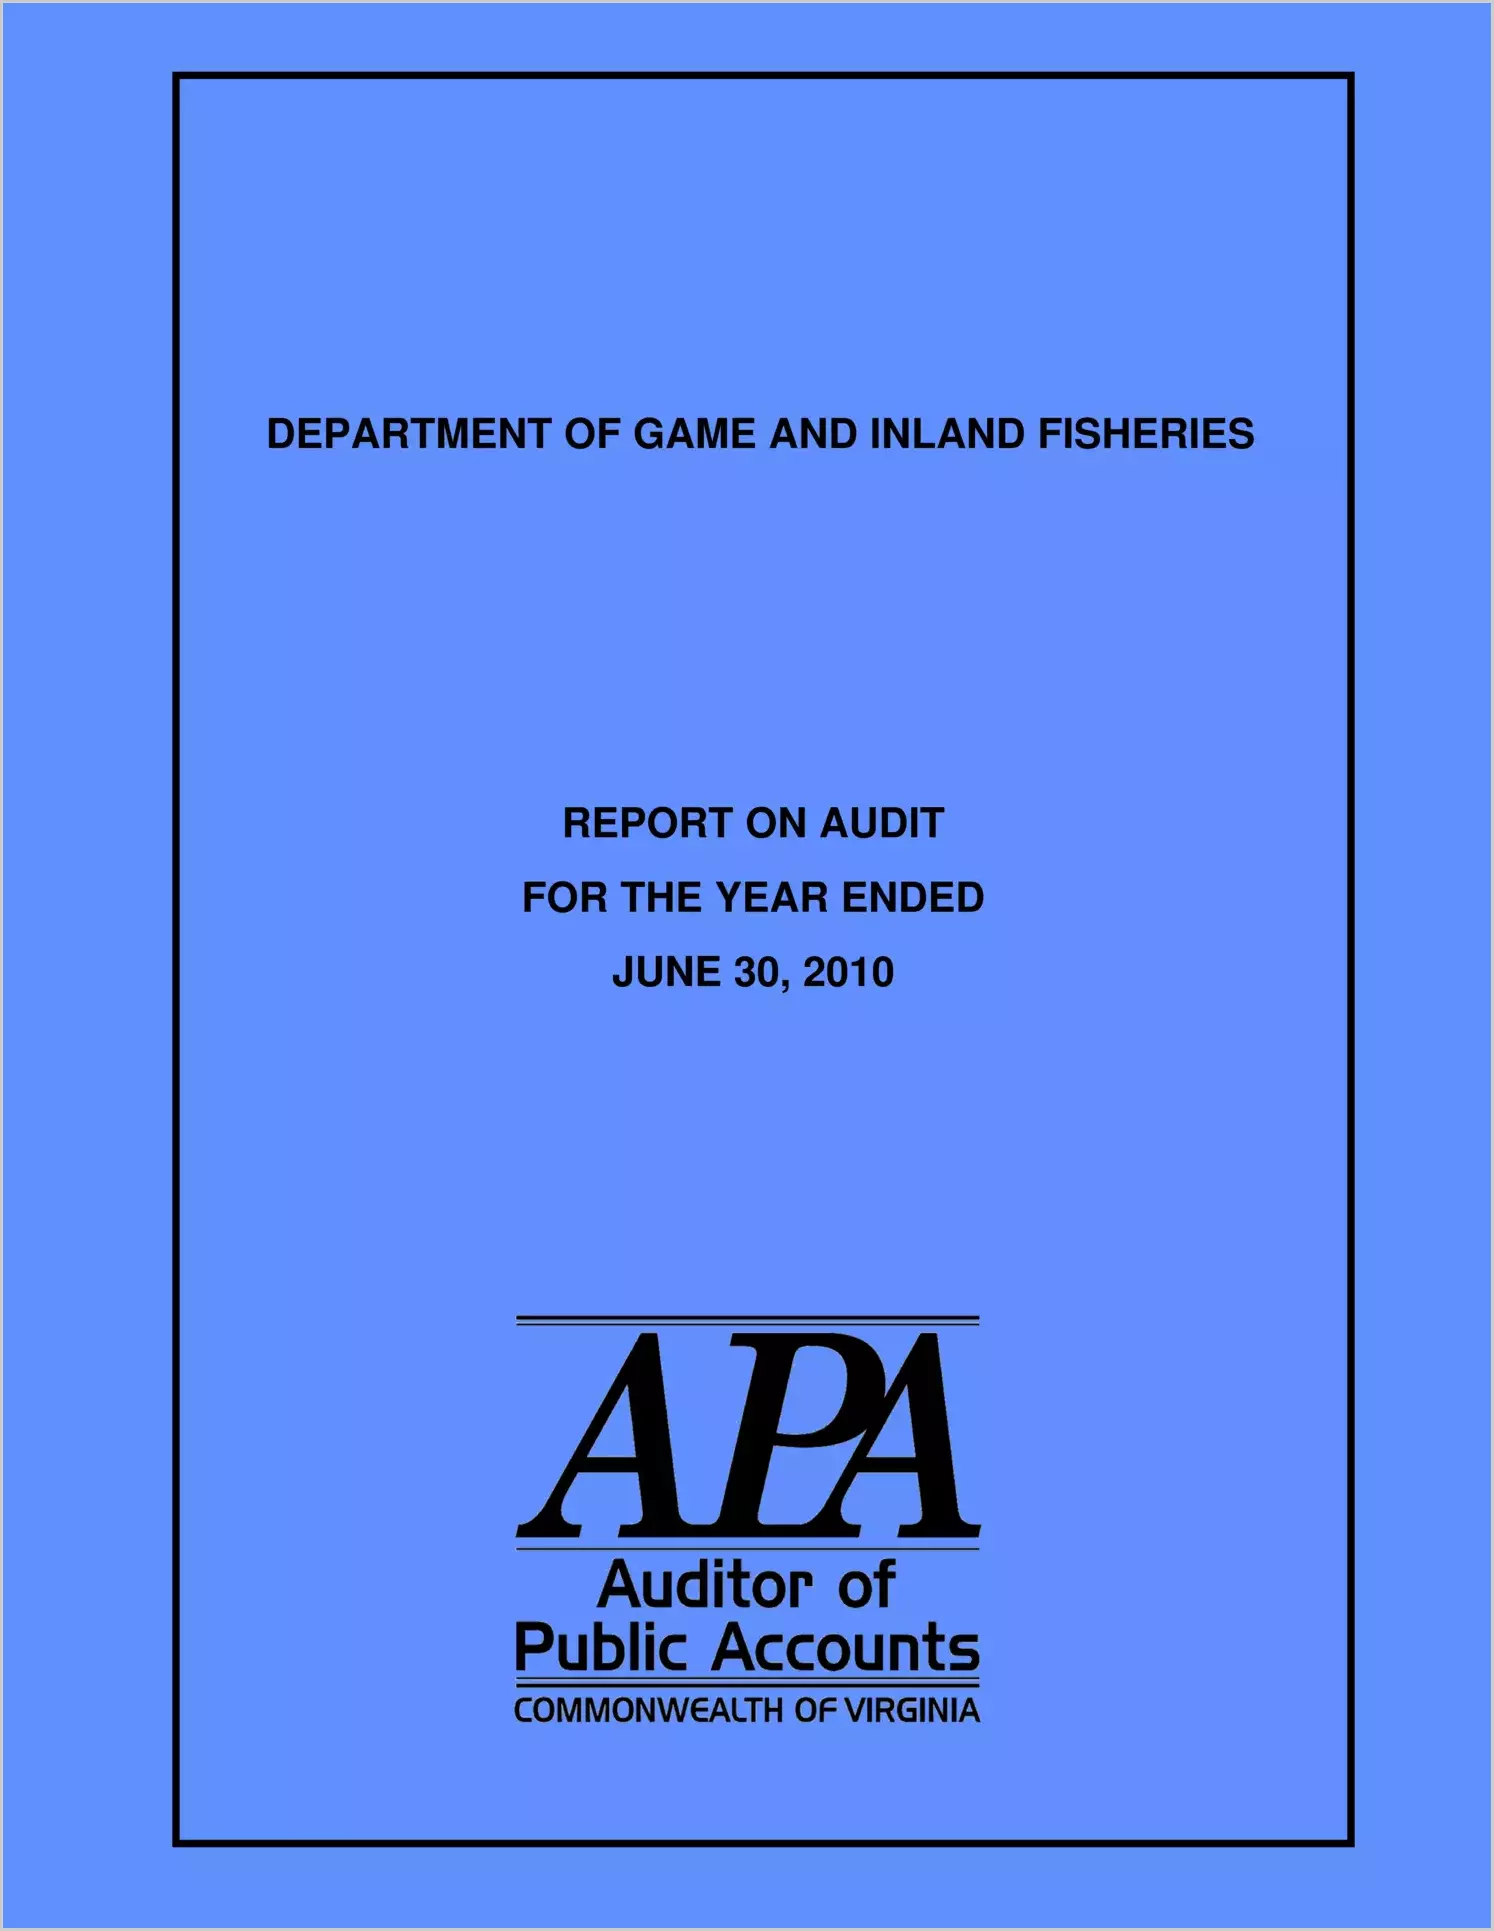 Department of Game and Inland Fisheries Report on Audit for the period April 1, 2008 through June 30, 2010